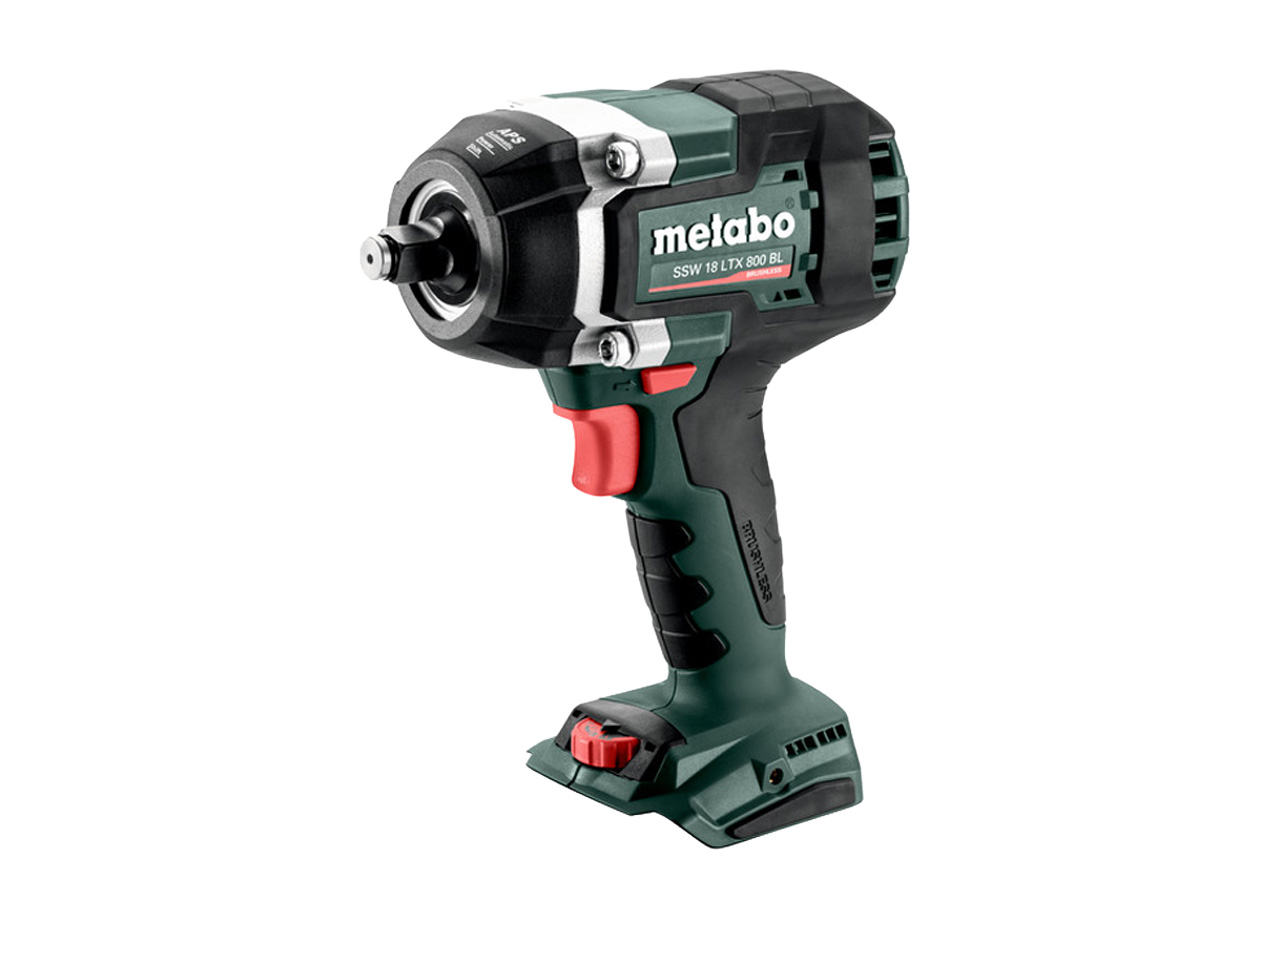 Metabo SSW18LTX800BL 18V 1/2in 800Nm LXT BL Impact Wrench